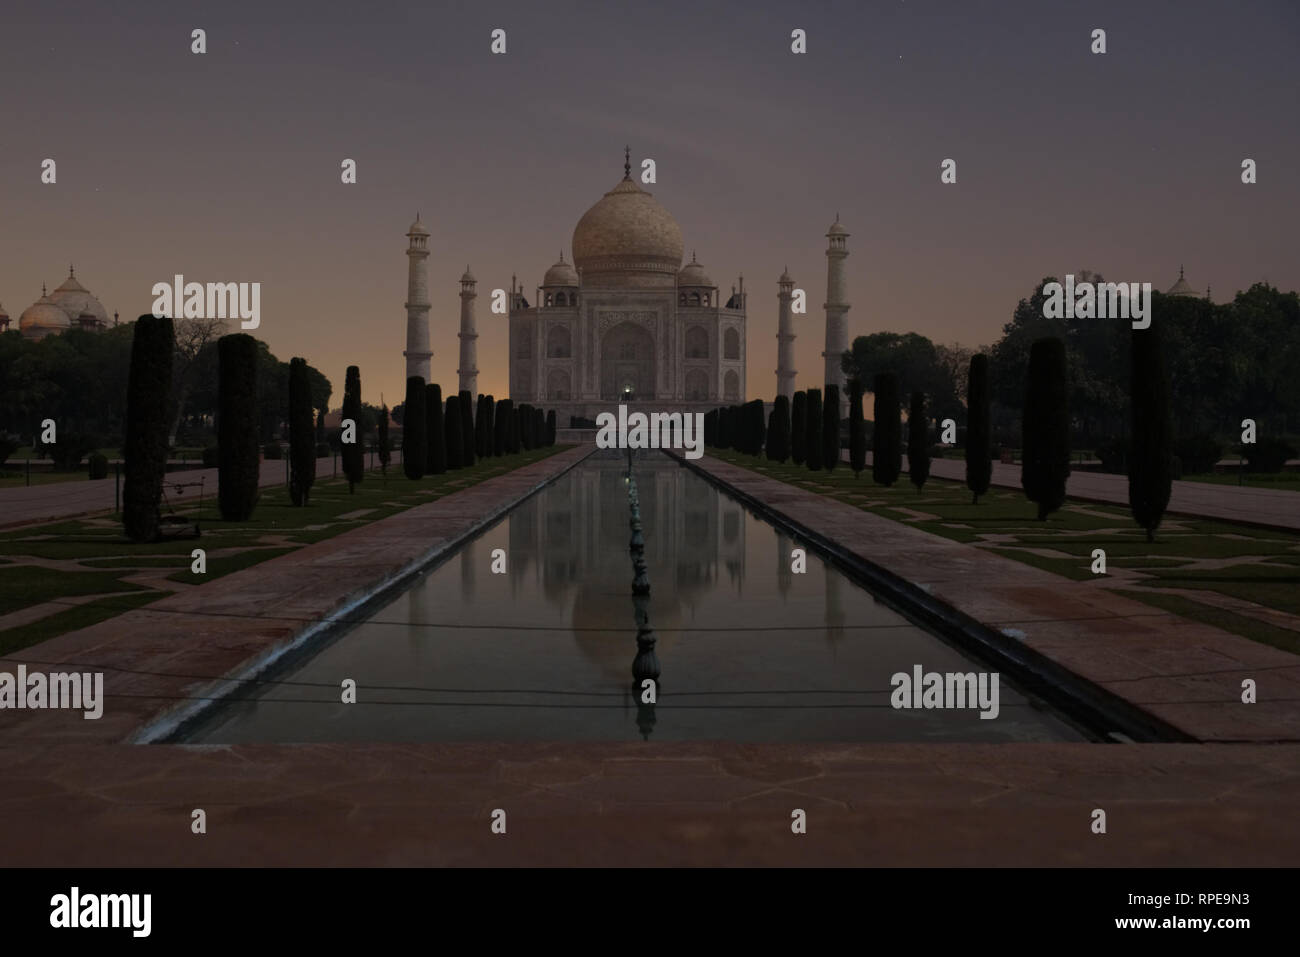 Taj Mahal. The Mughal mausoleum's white marble glistening. Lit by full moonlight alone. An astrological and architectural wonder. Stock Photo